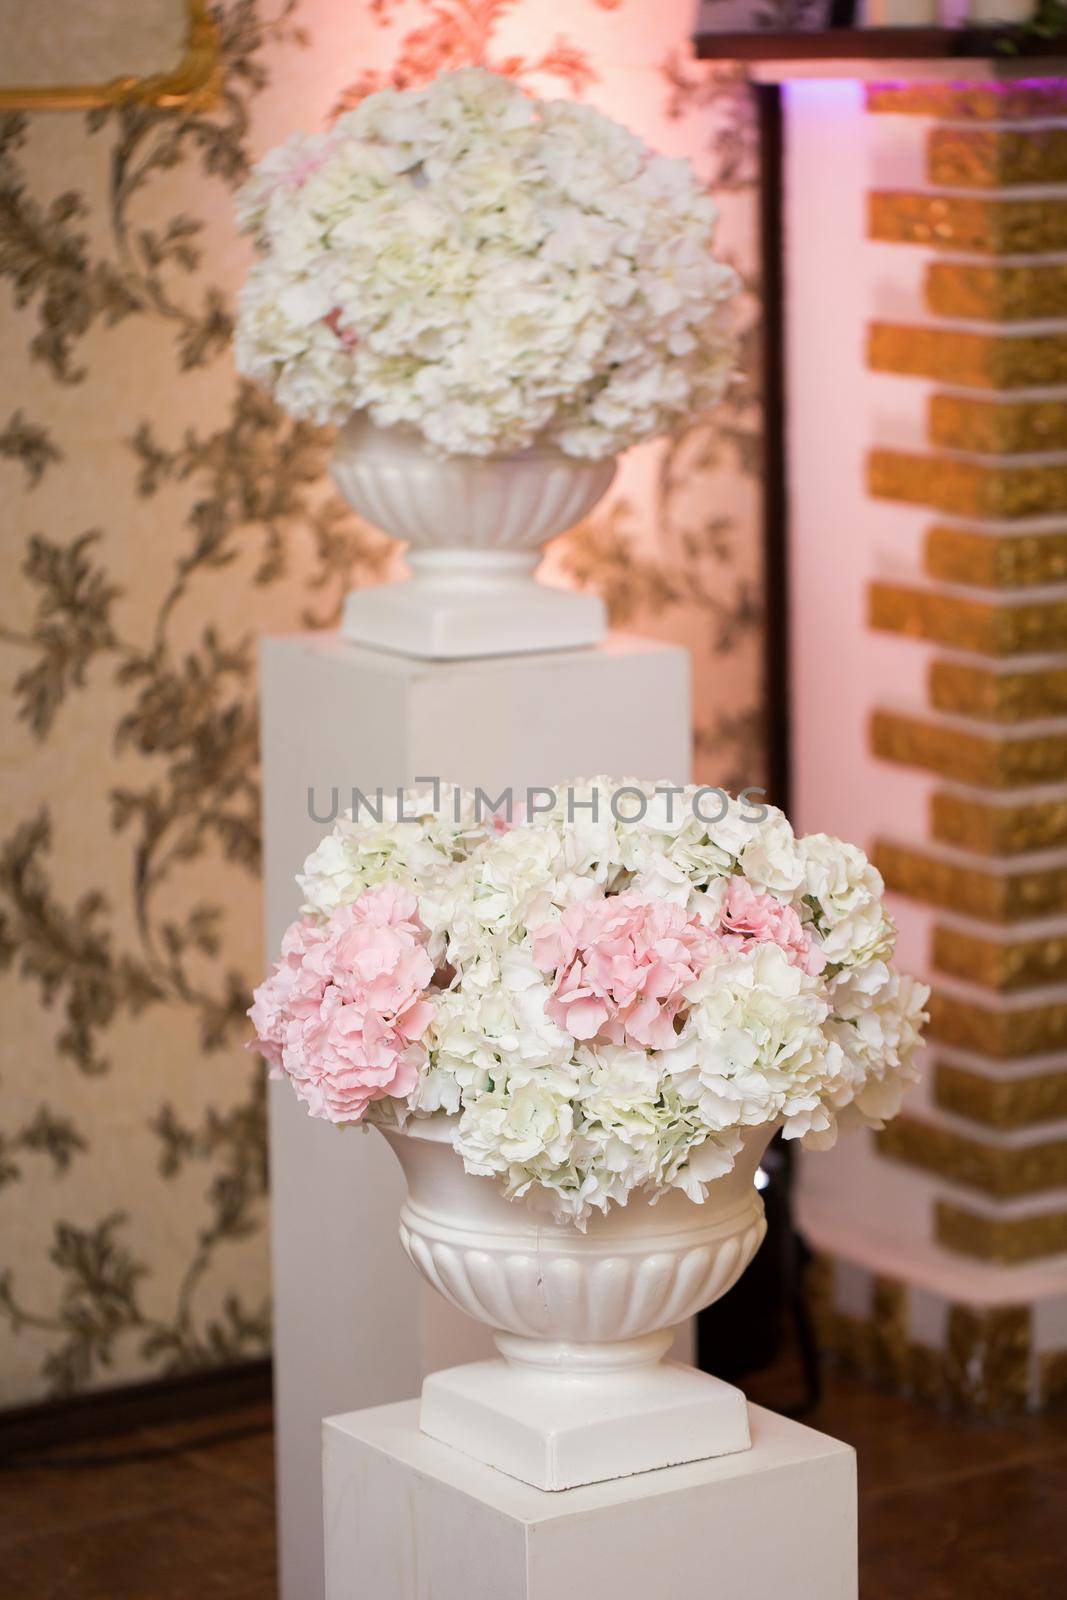 Wedding decor of white and pink flowers in huge white vases